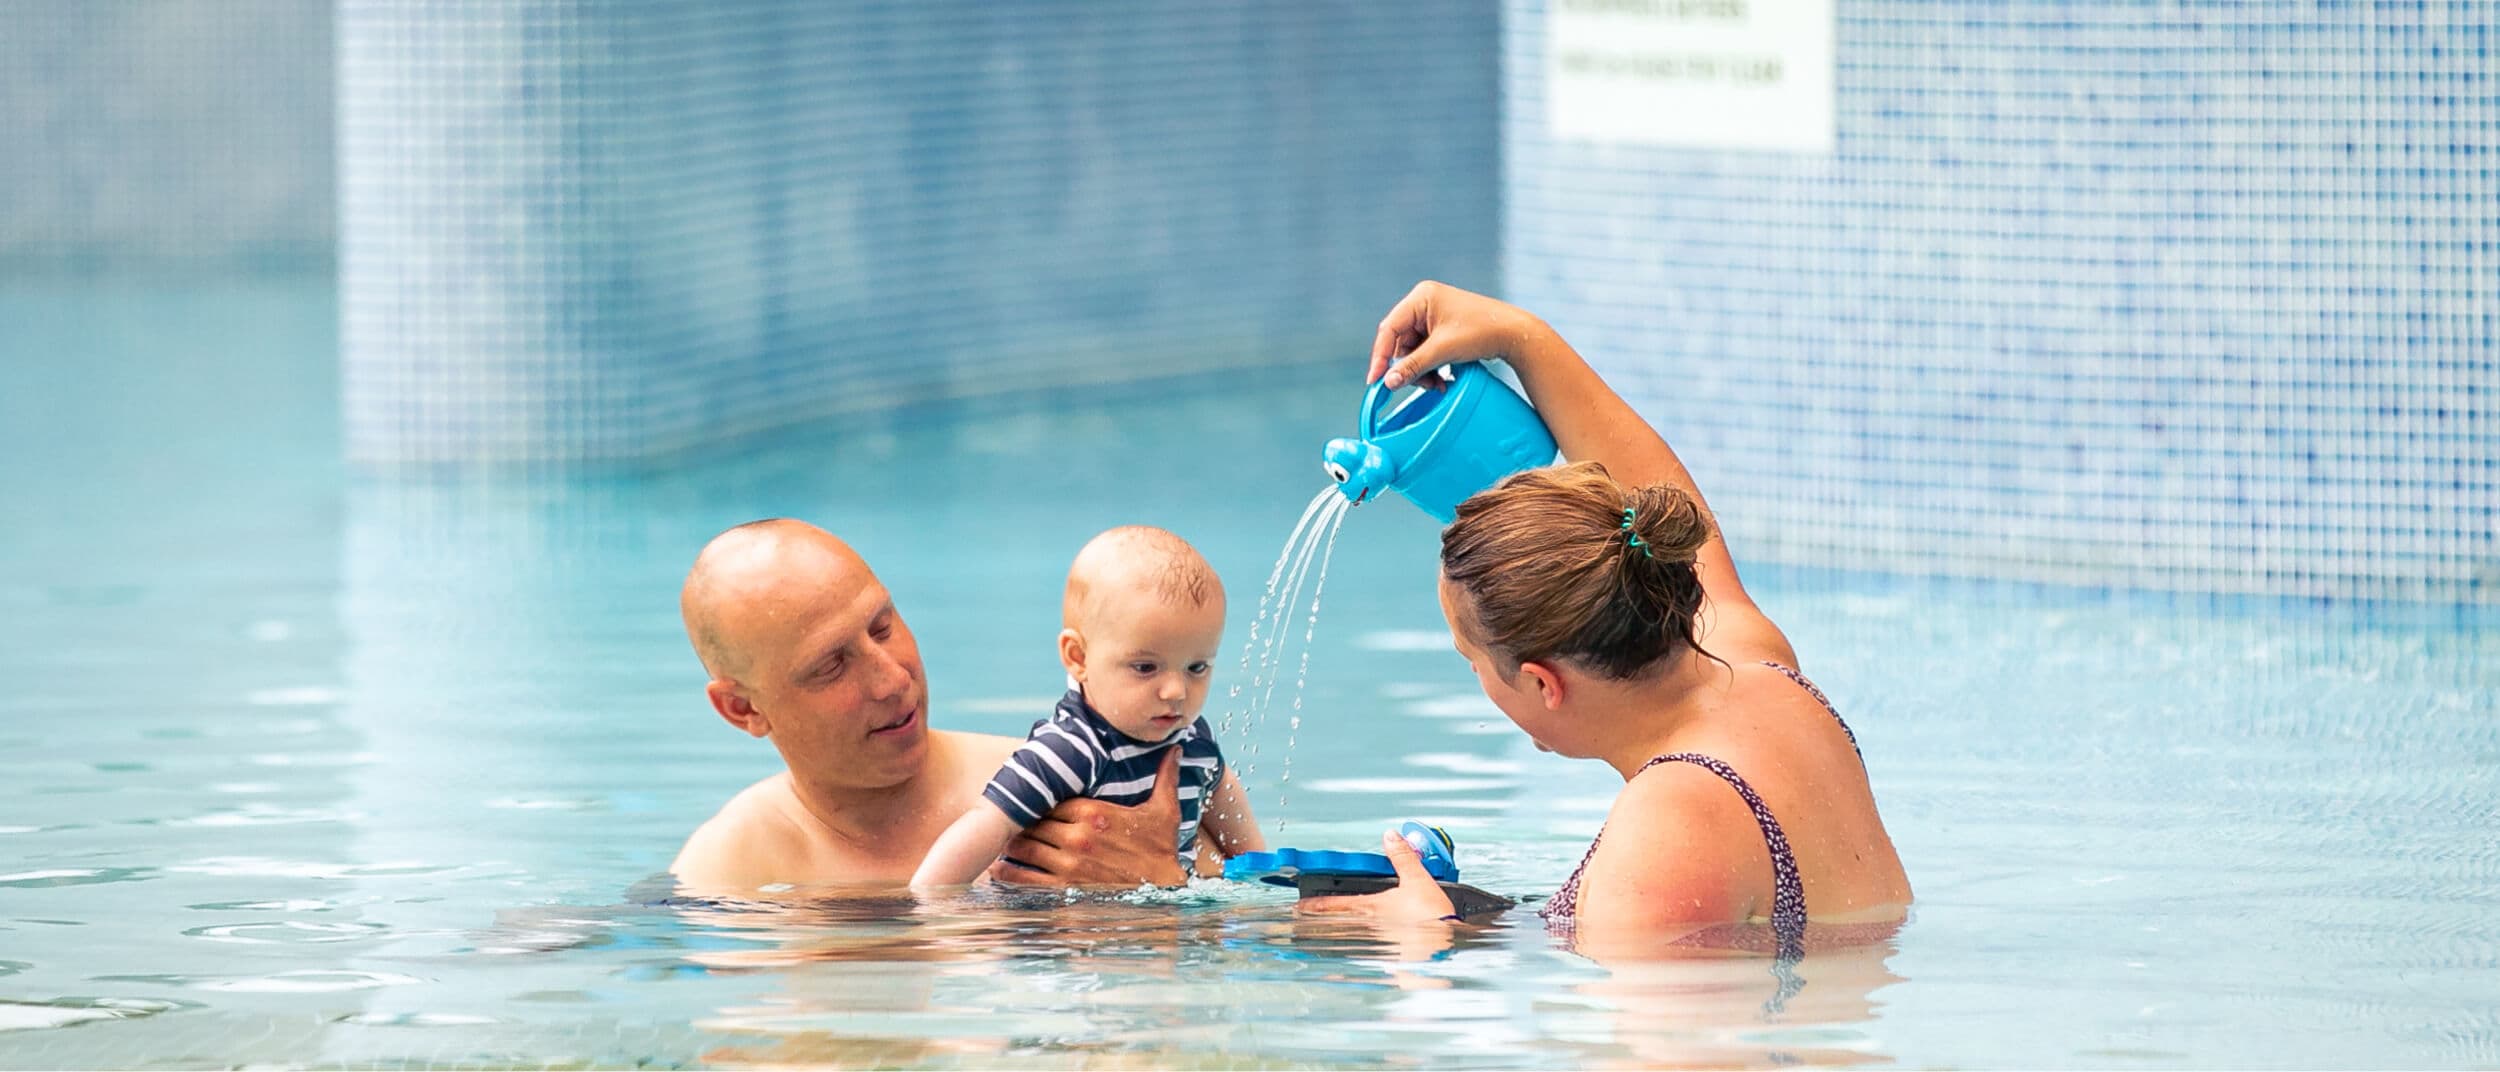 Couple with a baby enjoying the pool 